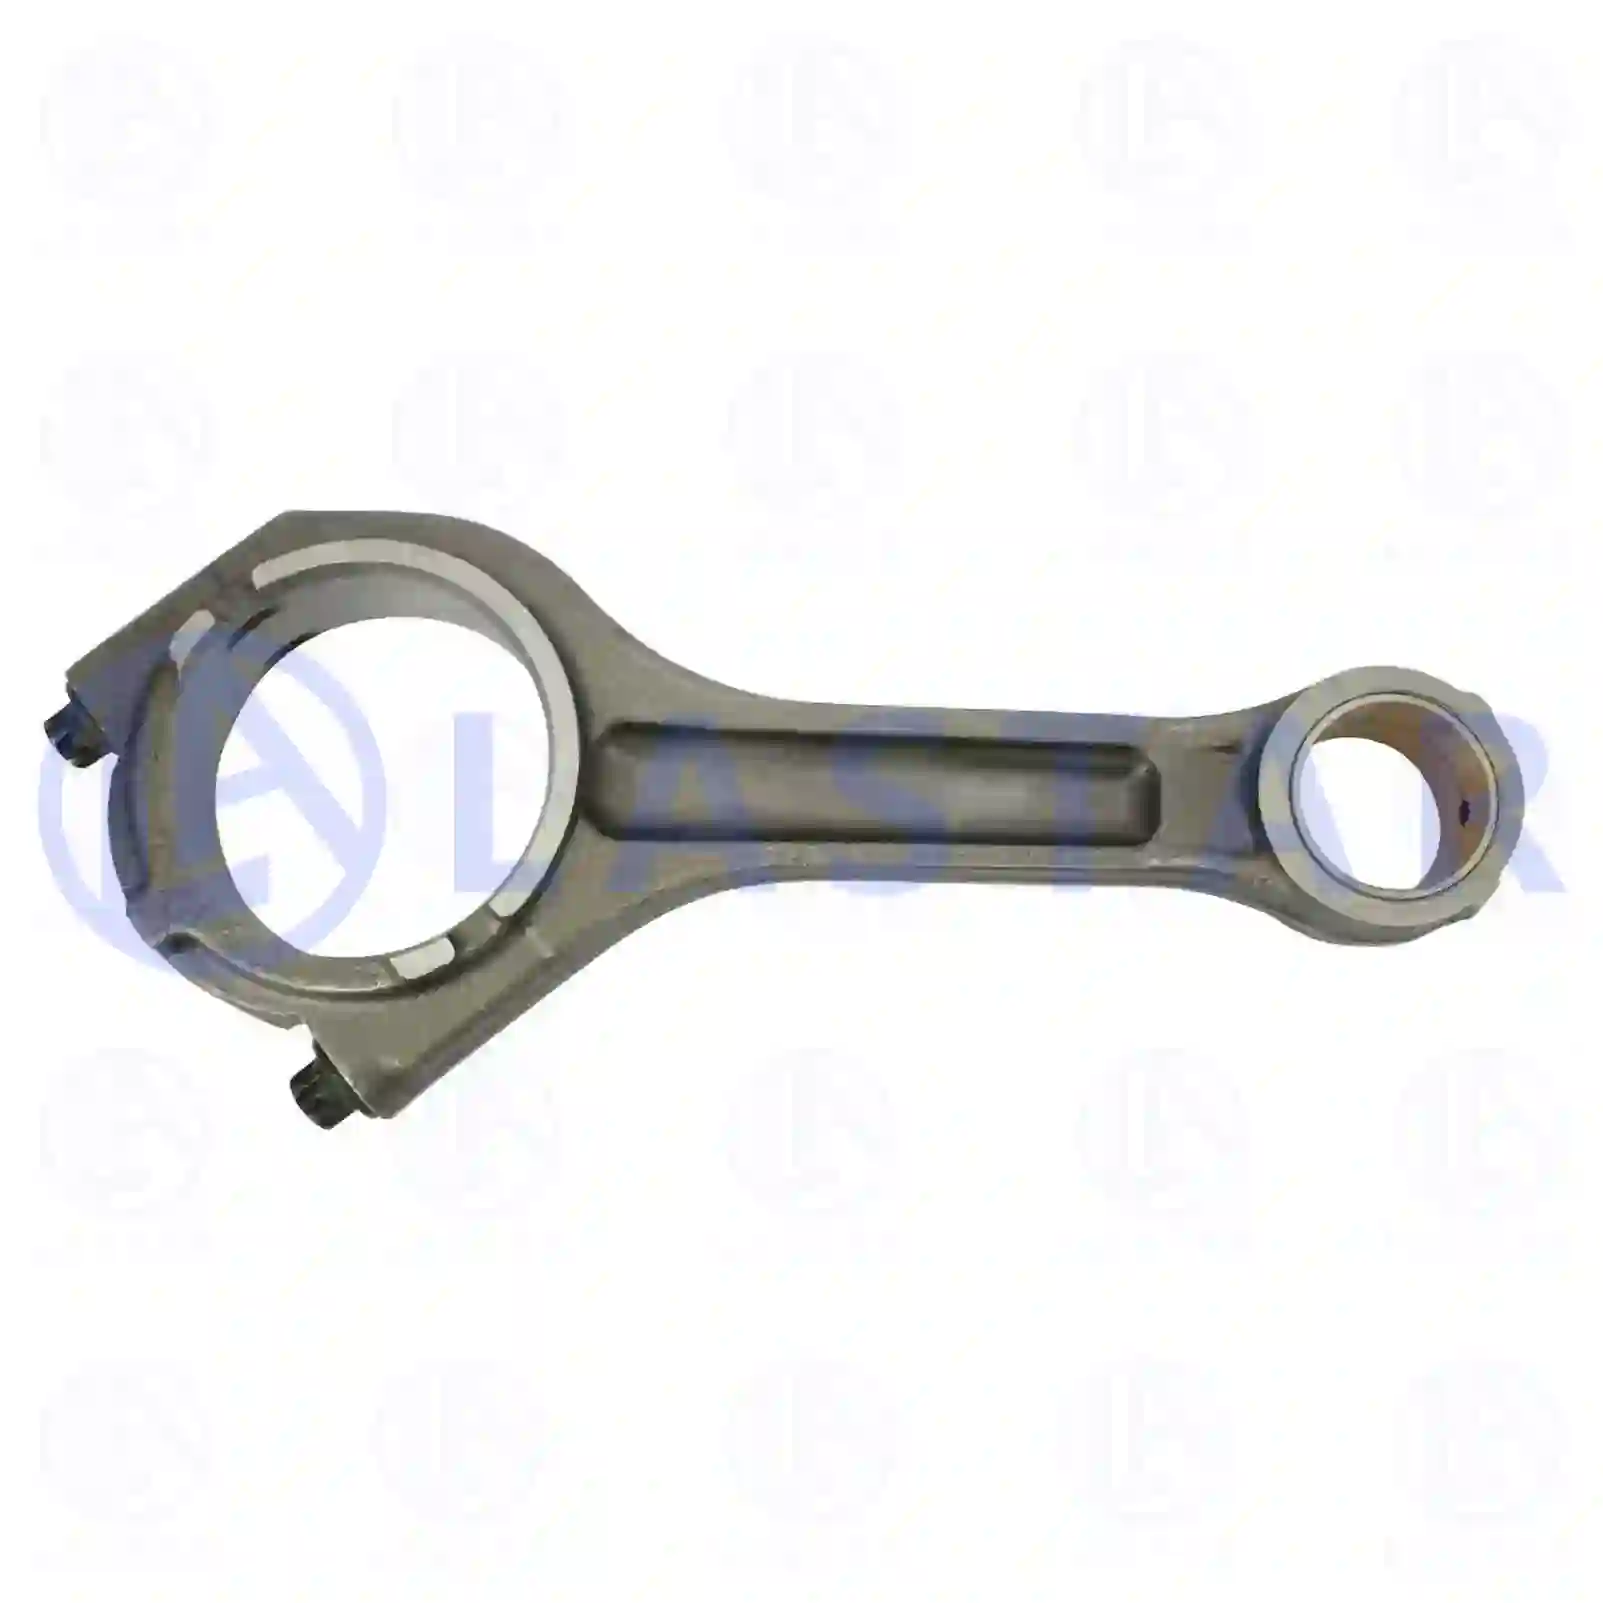 Connecting rod, straight head, 77704408, 51024006027, 51024006033, 51024006035, 51024006043, 51024006044, 51024010209, 51024016192 ||  77704408 Lastar Spare Part | Truck Spare Parts, Auotomotive Spare Parts Connecting rod, straight head, 77704408, 51024006027, 51024006033, 51024006035, 51024006043, 51024006044, 51024010209, 51024016192 ||  77704408 Lastar Spare Part | Truck Spare Parts, Auotomotive Spare Parts